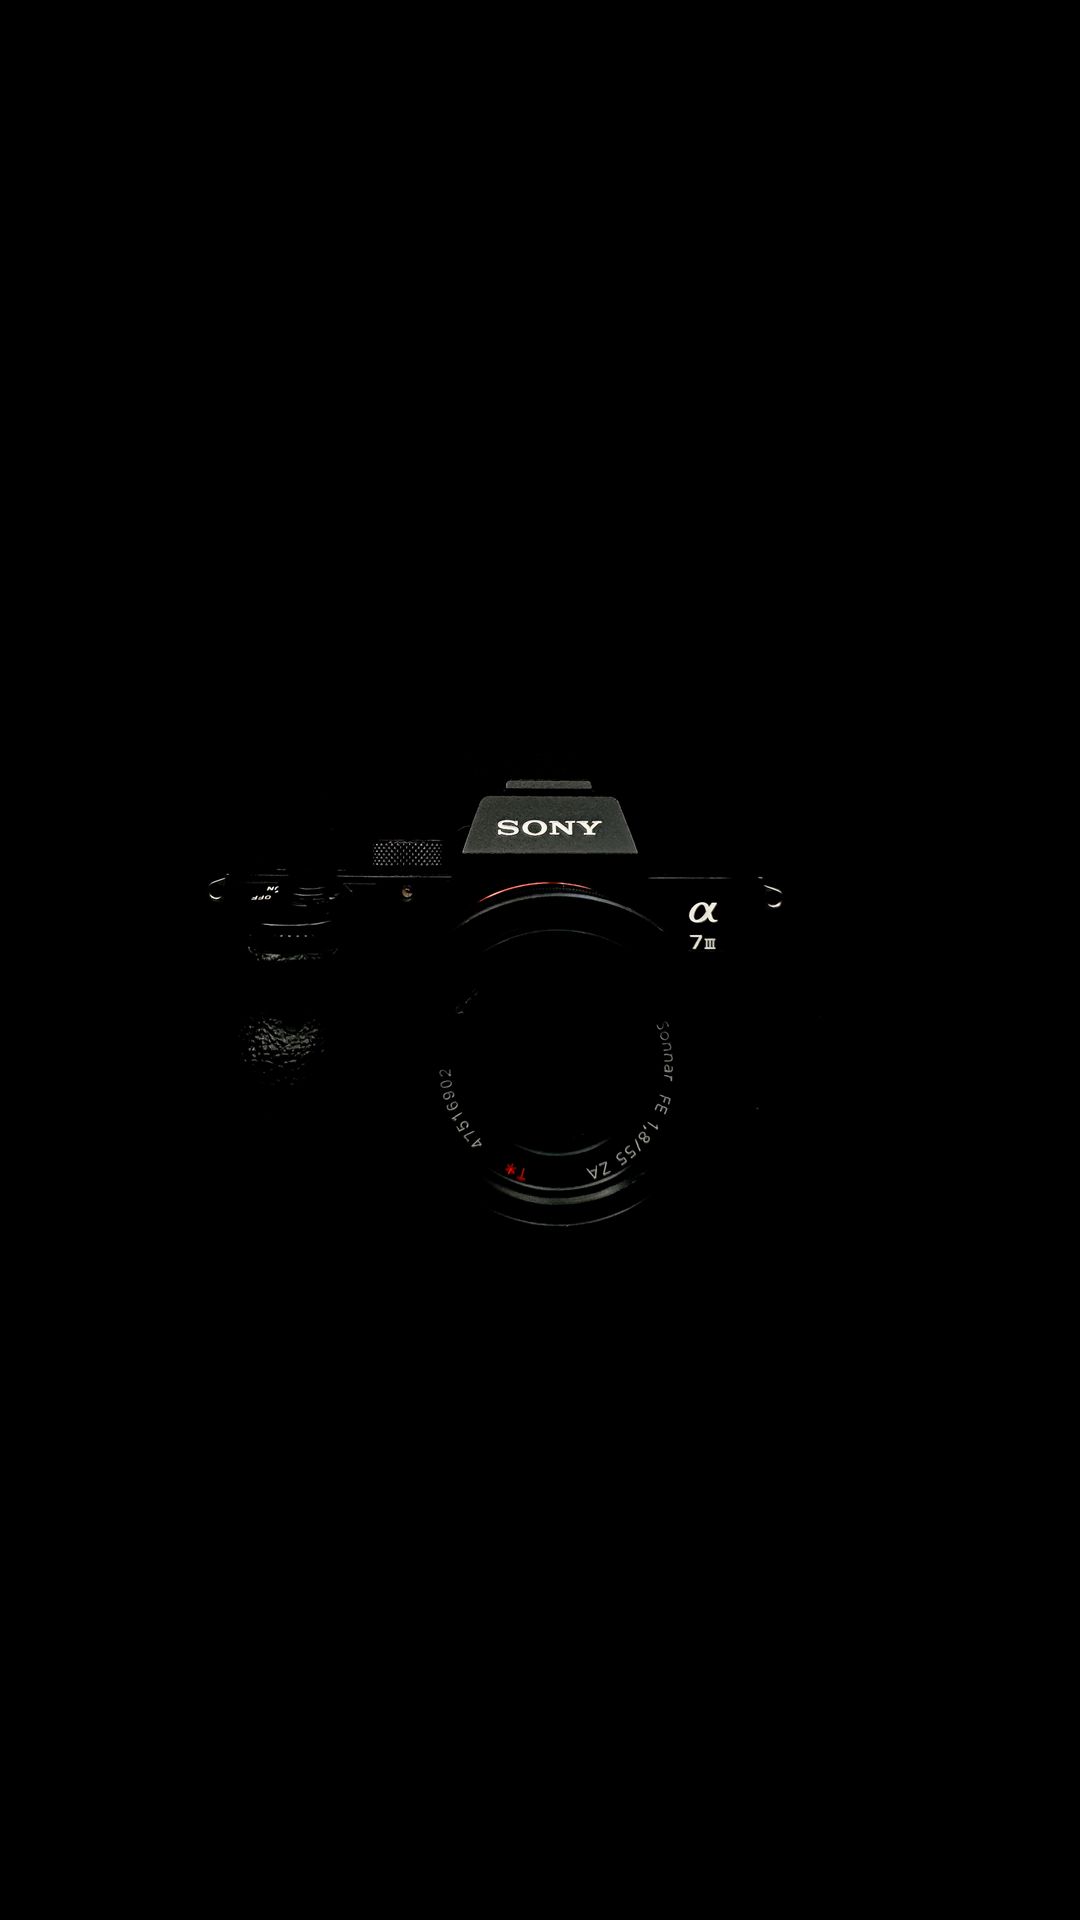 Sony adds anti-theft crypto signature tech to in-camera images